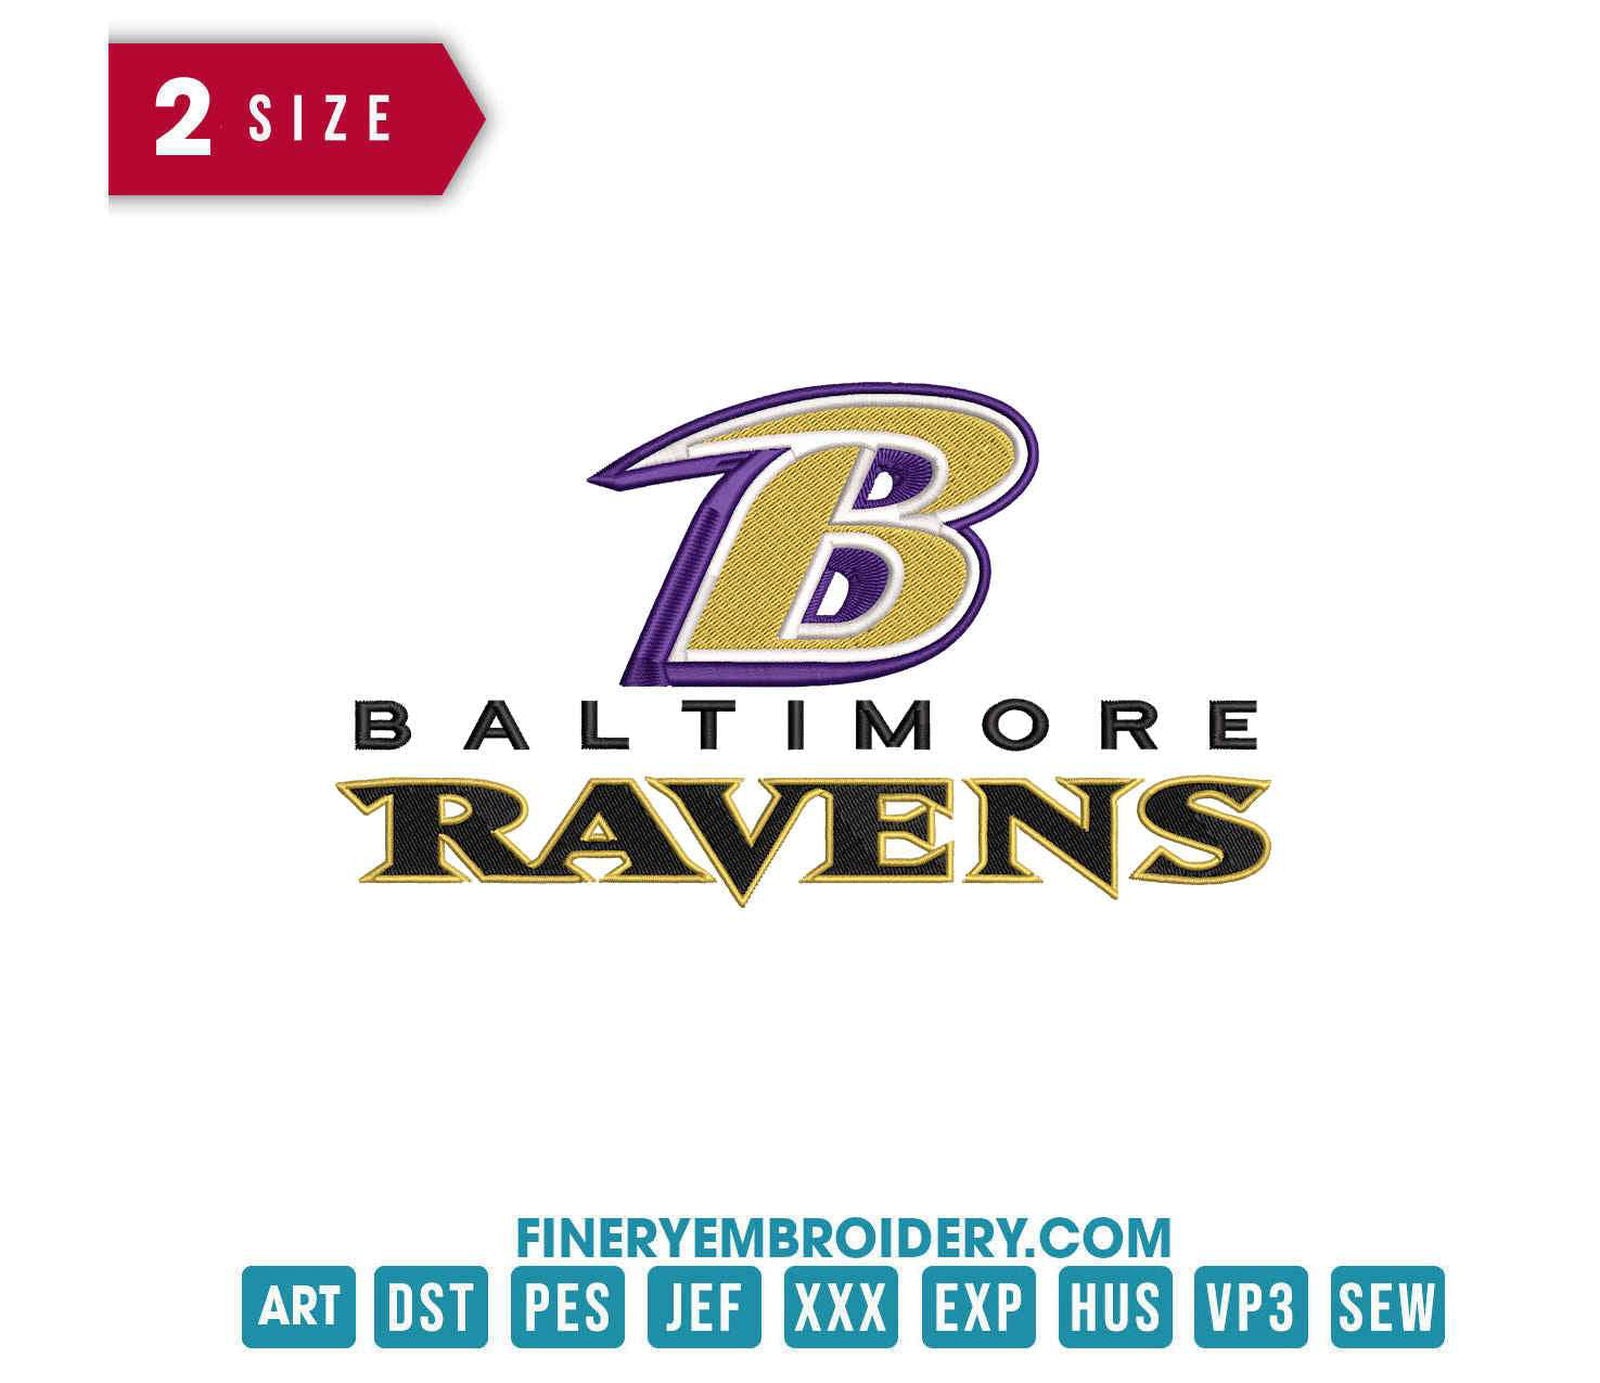 Baltimore Ravens 3 : Embroidery Design - FineryEmbroidery